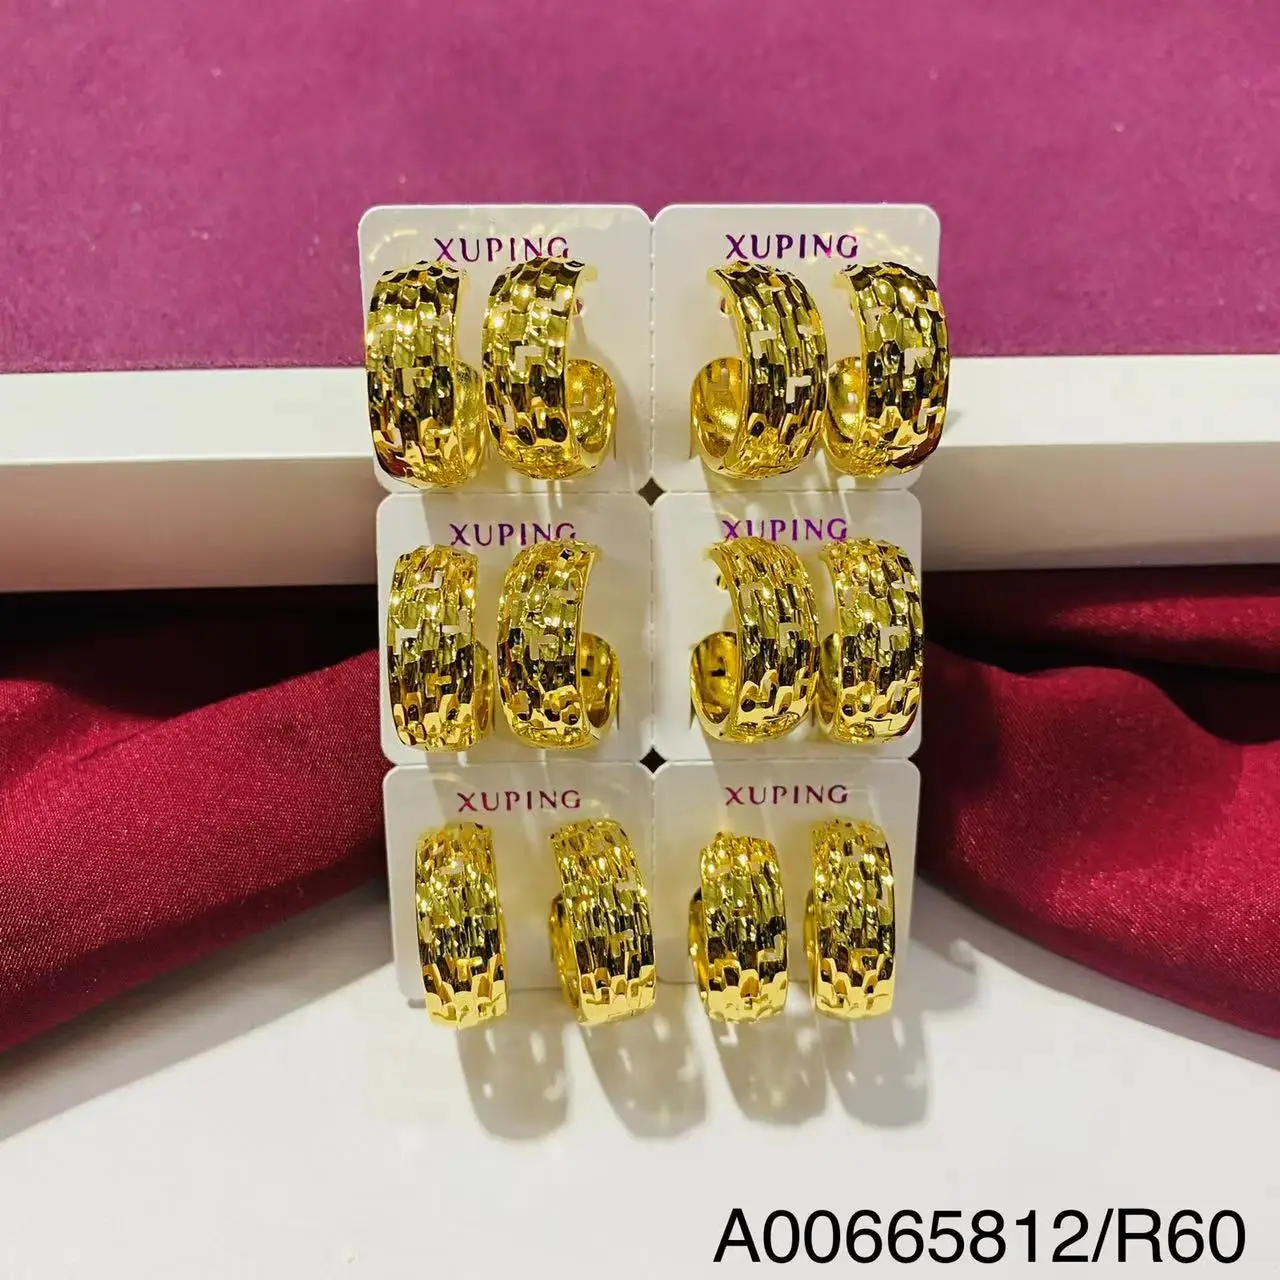 212 xuping jewelry Wholesale Free sample free shipping Simple Luxury Dubai 24k Gold Plated Multi-Style All-match Earrings